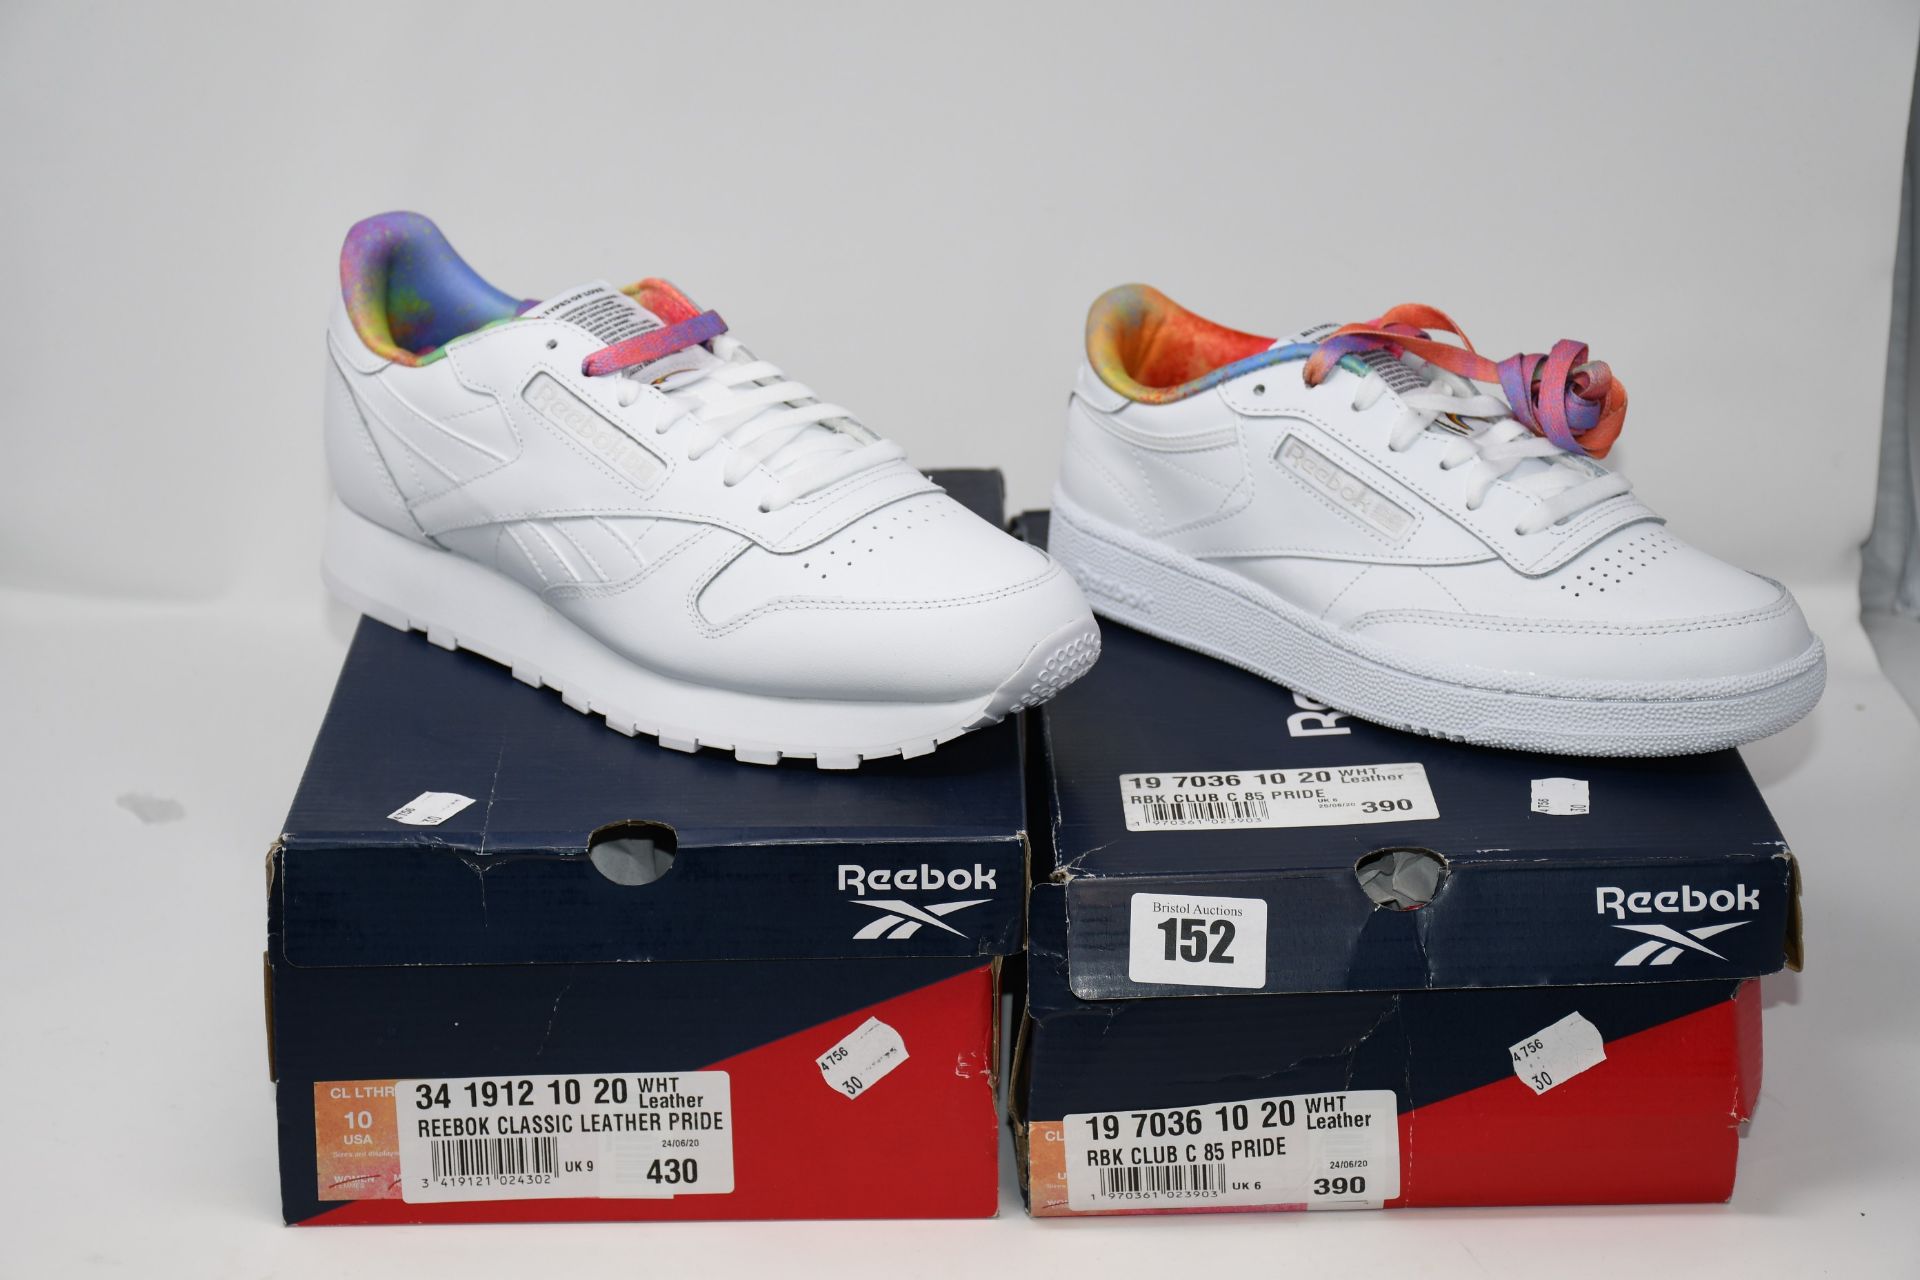 One as new Reebok white classic leather pride trainers size UK 9. One as new Reebok white classic